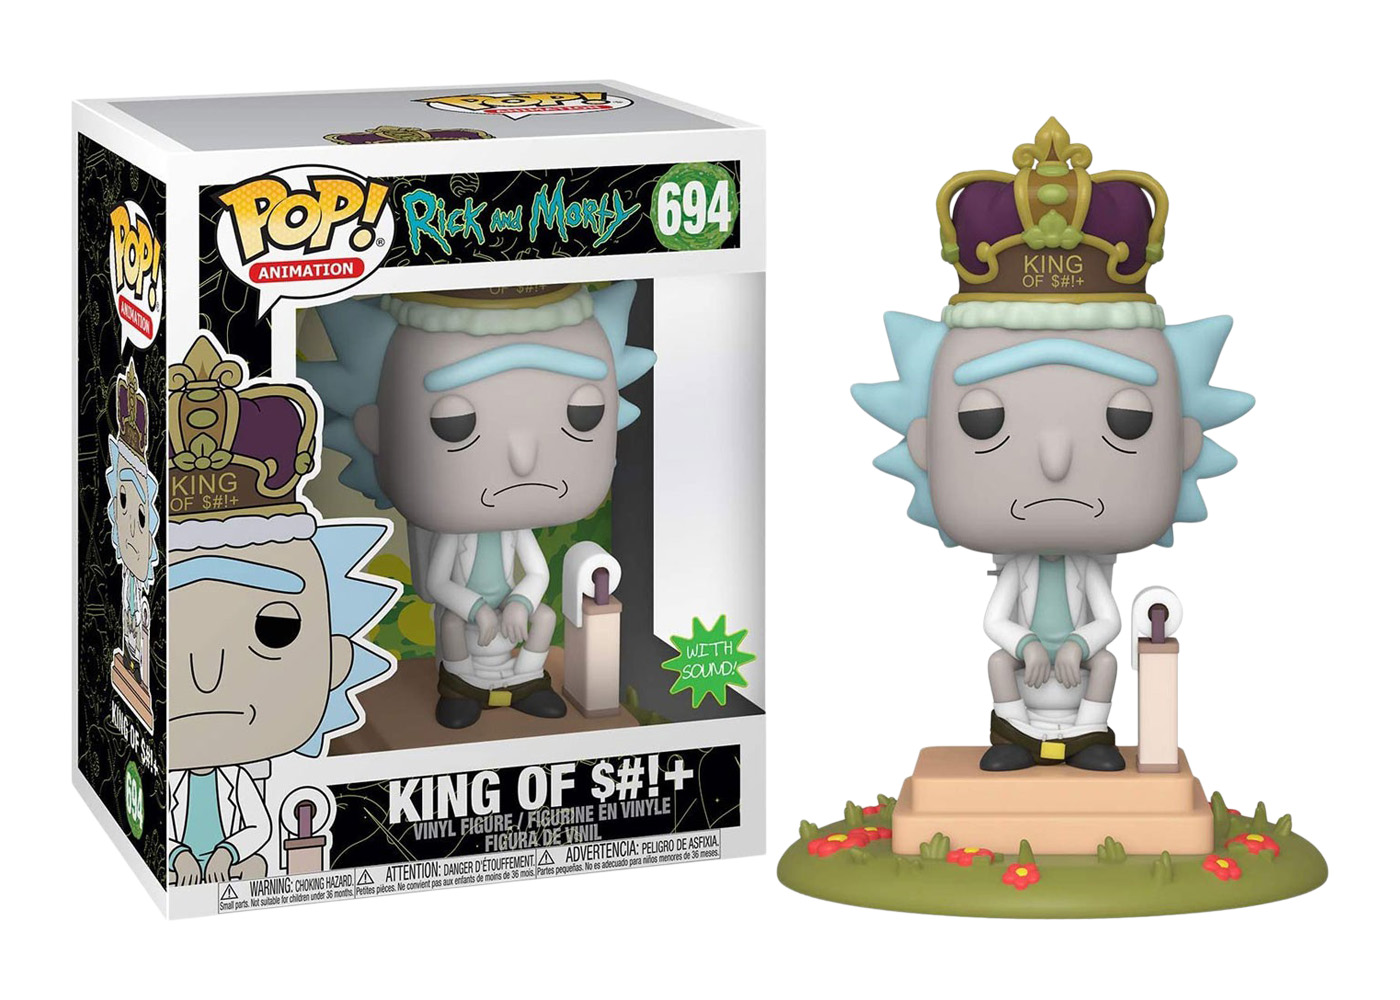 Funko Pop! Animation Rick & Morty King of $#!+ with Sound Figure